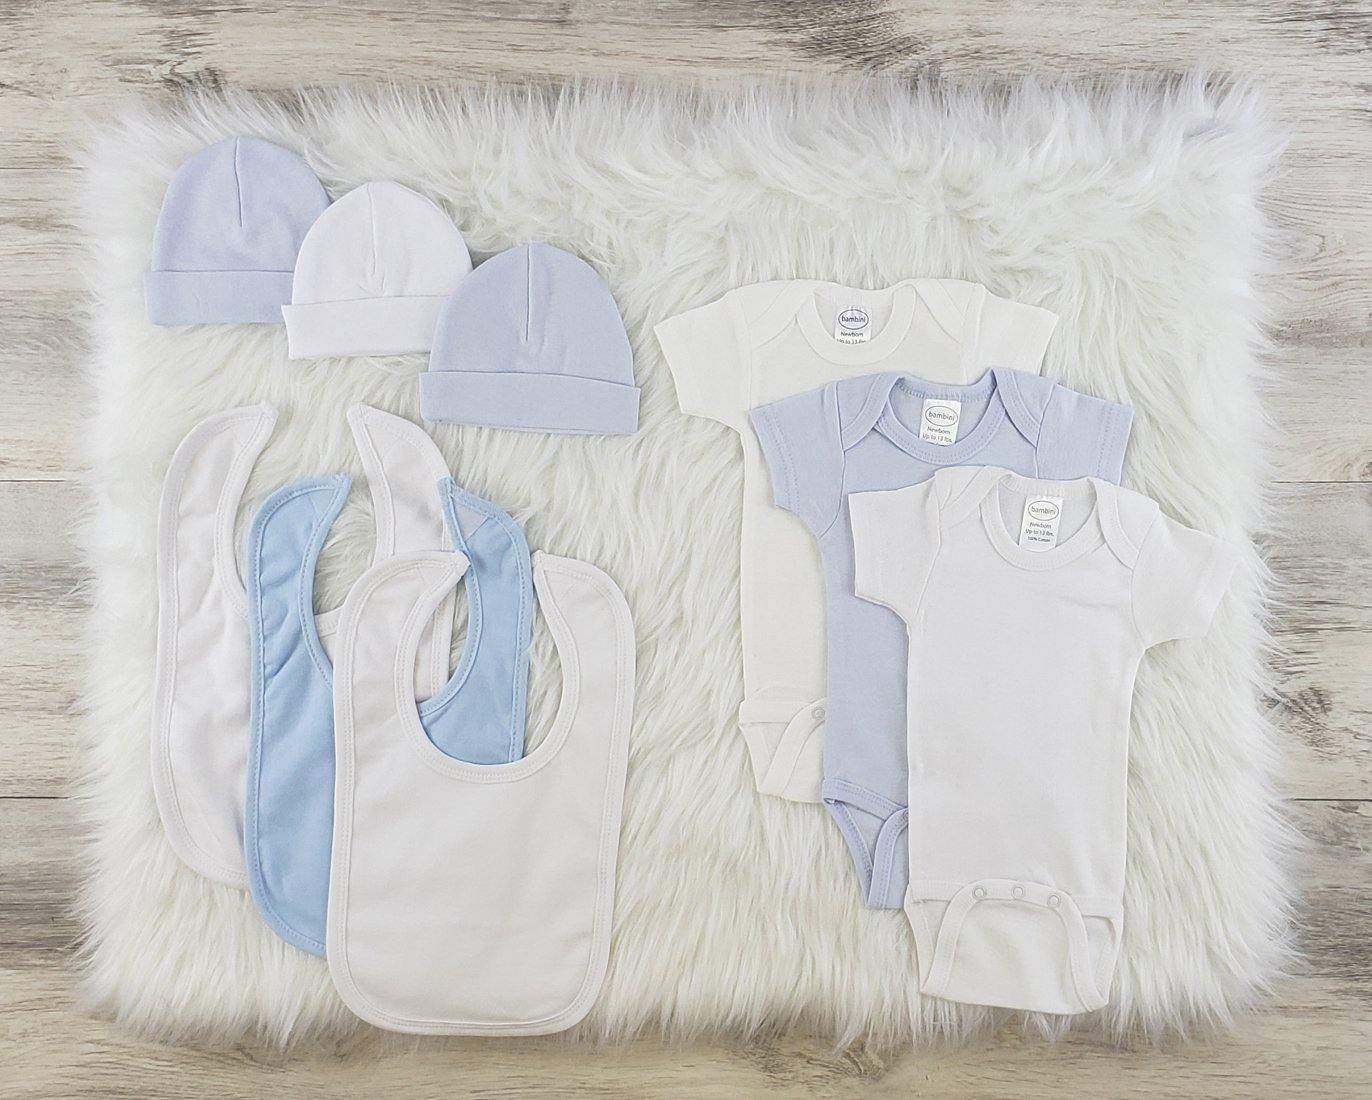 Bambini 9 Pc Boy Layette Baby Bib, Onesies, Beanies Clothes Set (NB,S,M,L)-Bambini-Baby Clothes,Baby Clothing Set,Beanies,Bibs,Layette Sets,Onesies